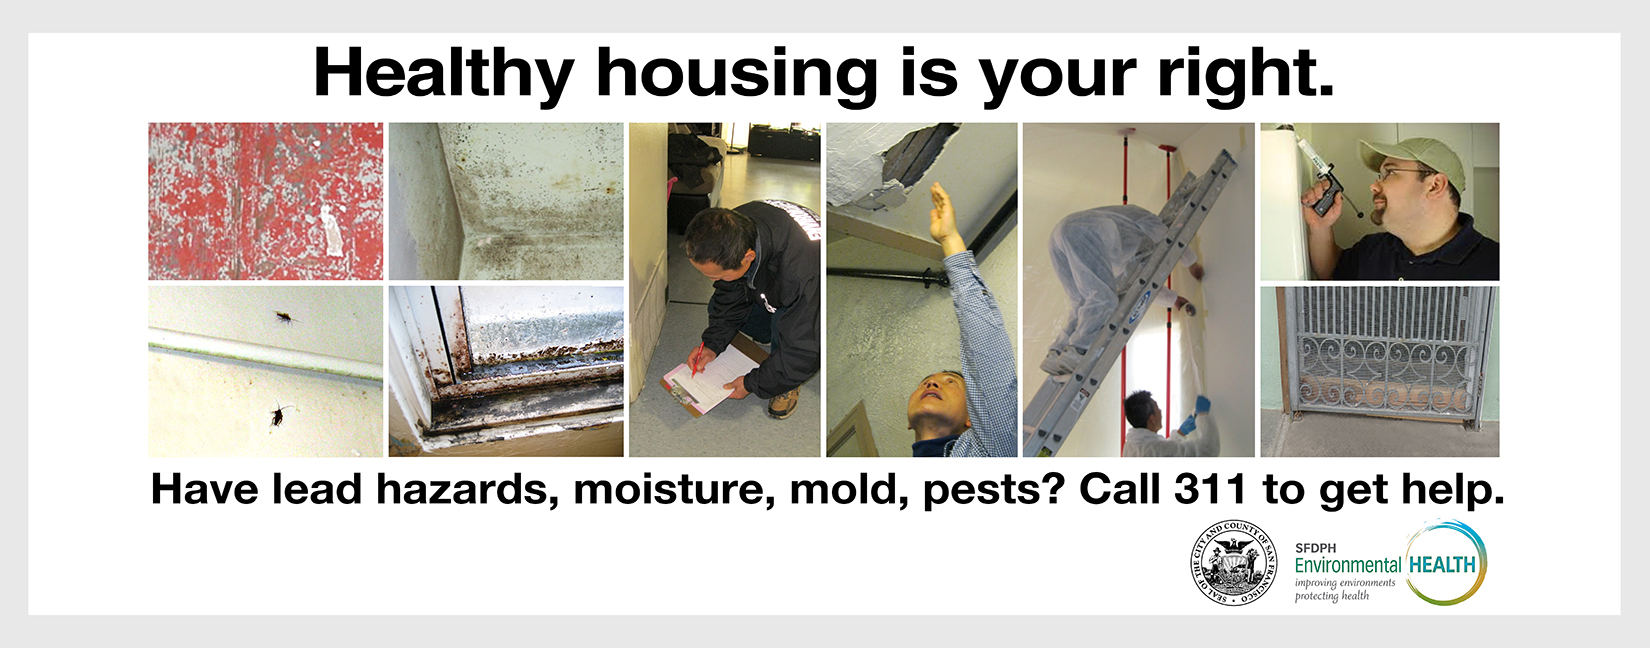 Healthy Housing is a right. If you have lead, moisture, mold or pests, call 311 to get help